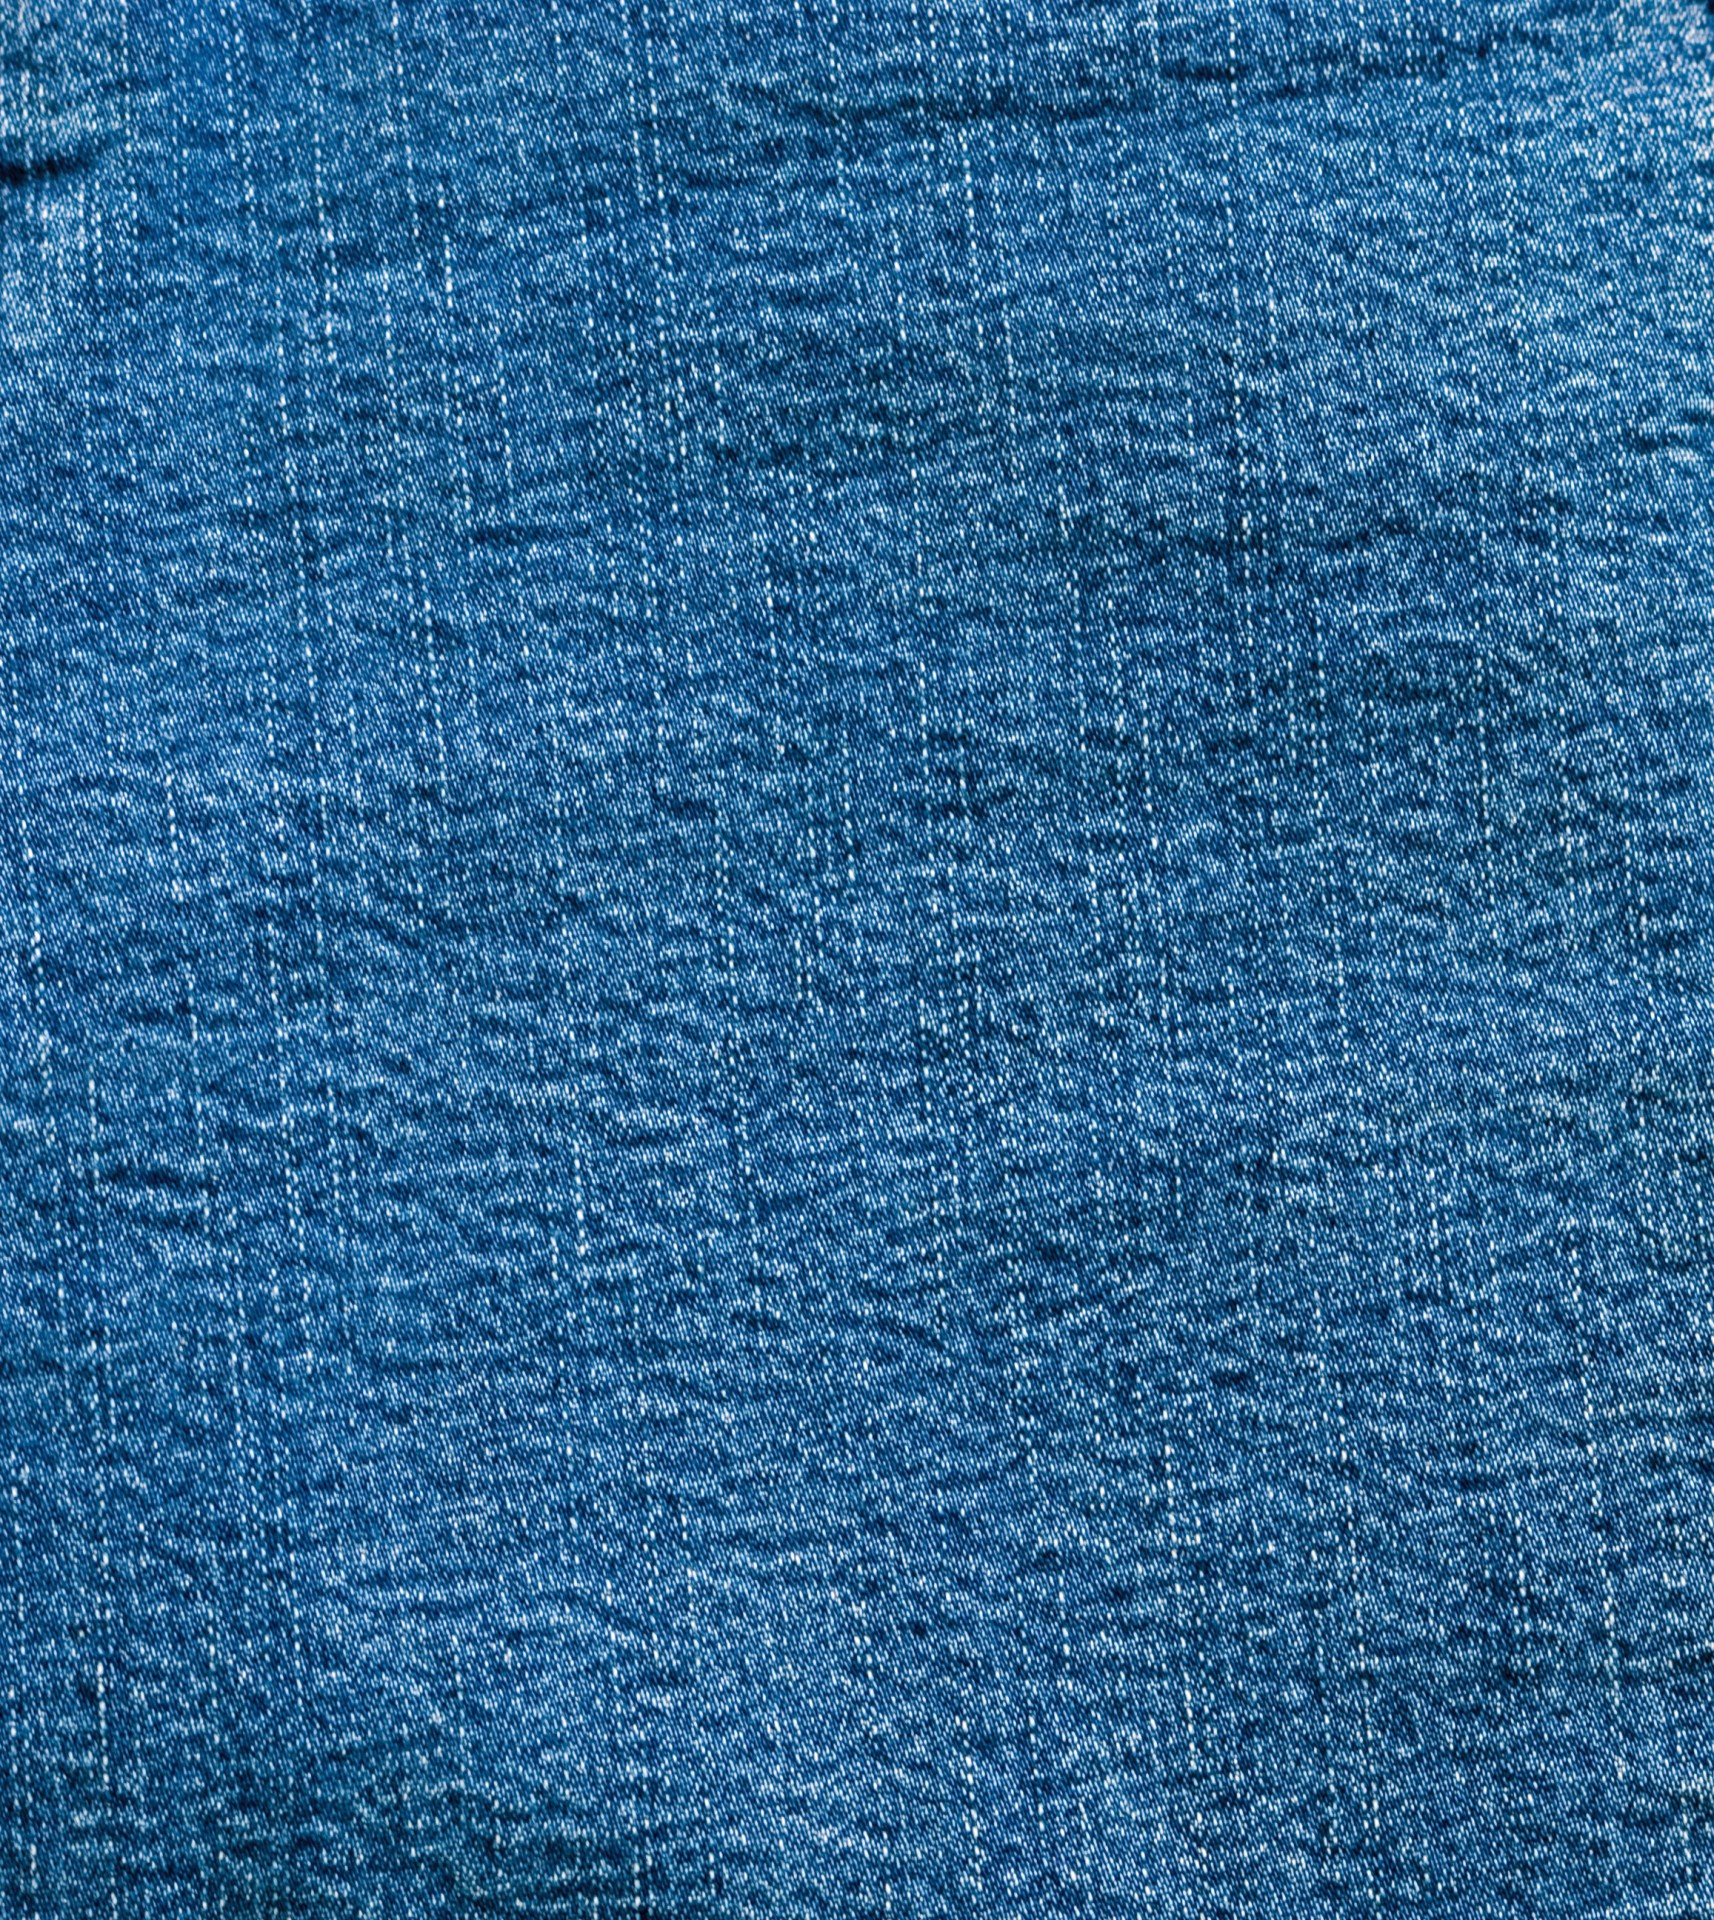 Denim Material Background Free Stock Photo - Public Domain Pictures